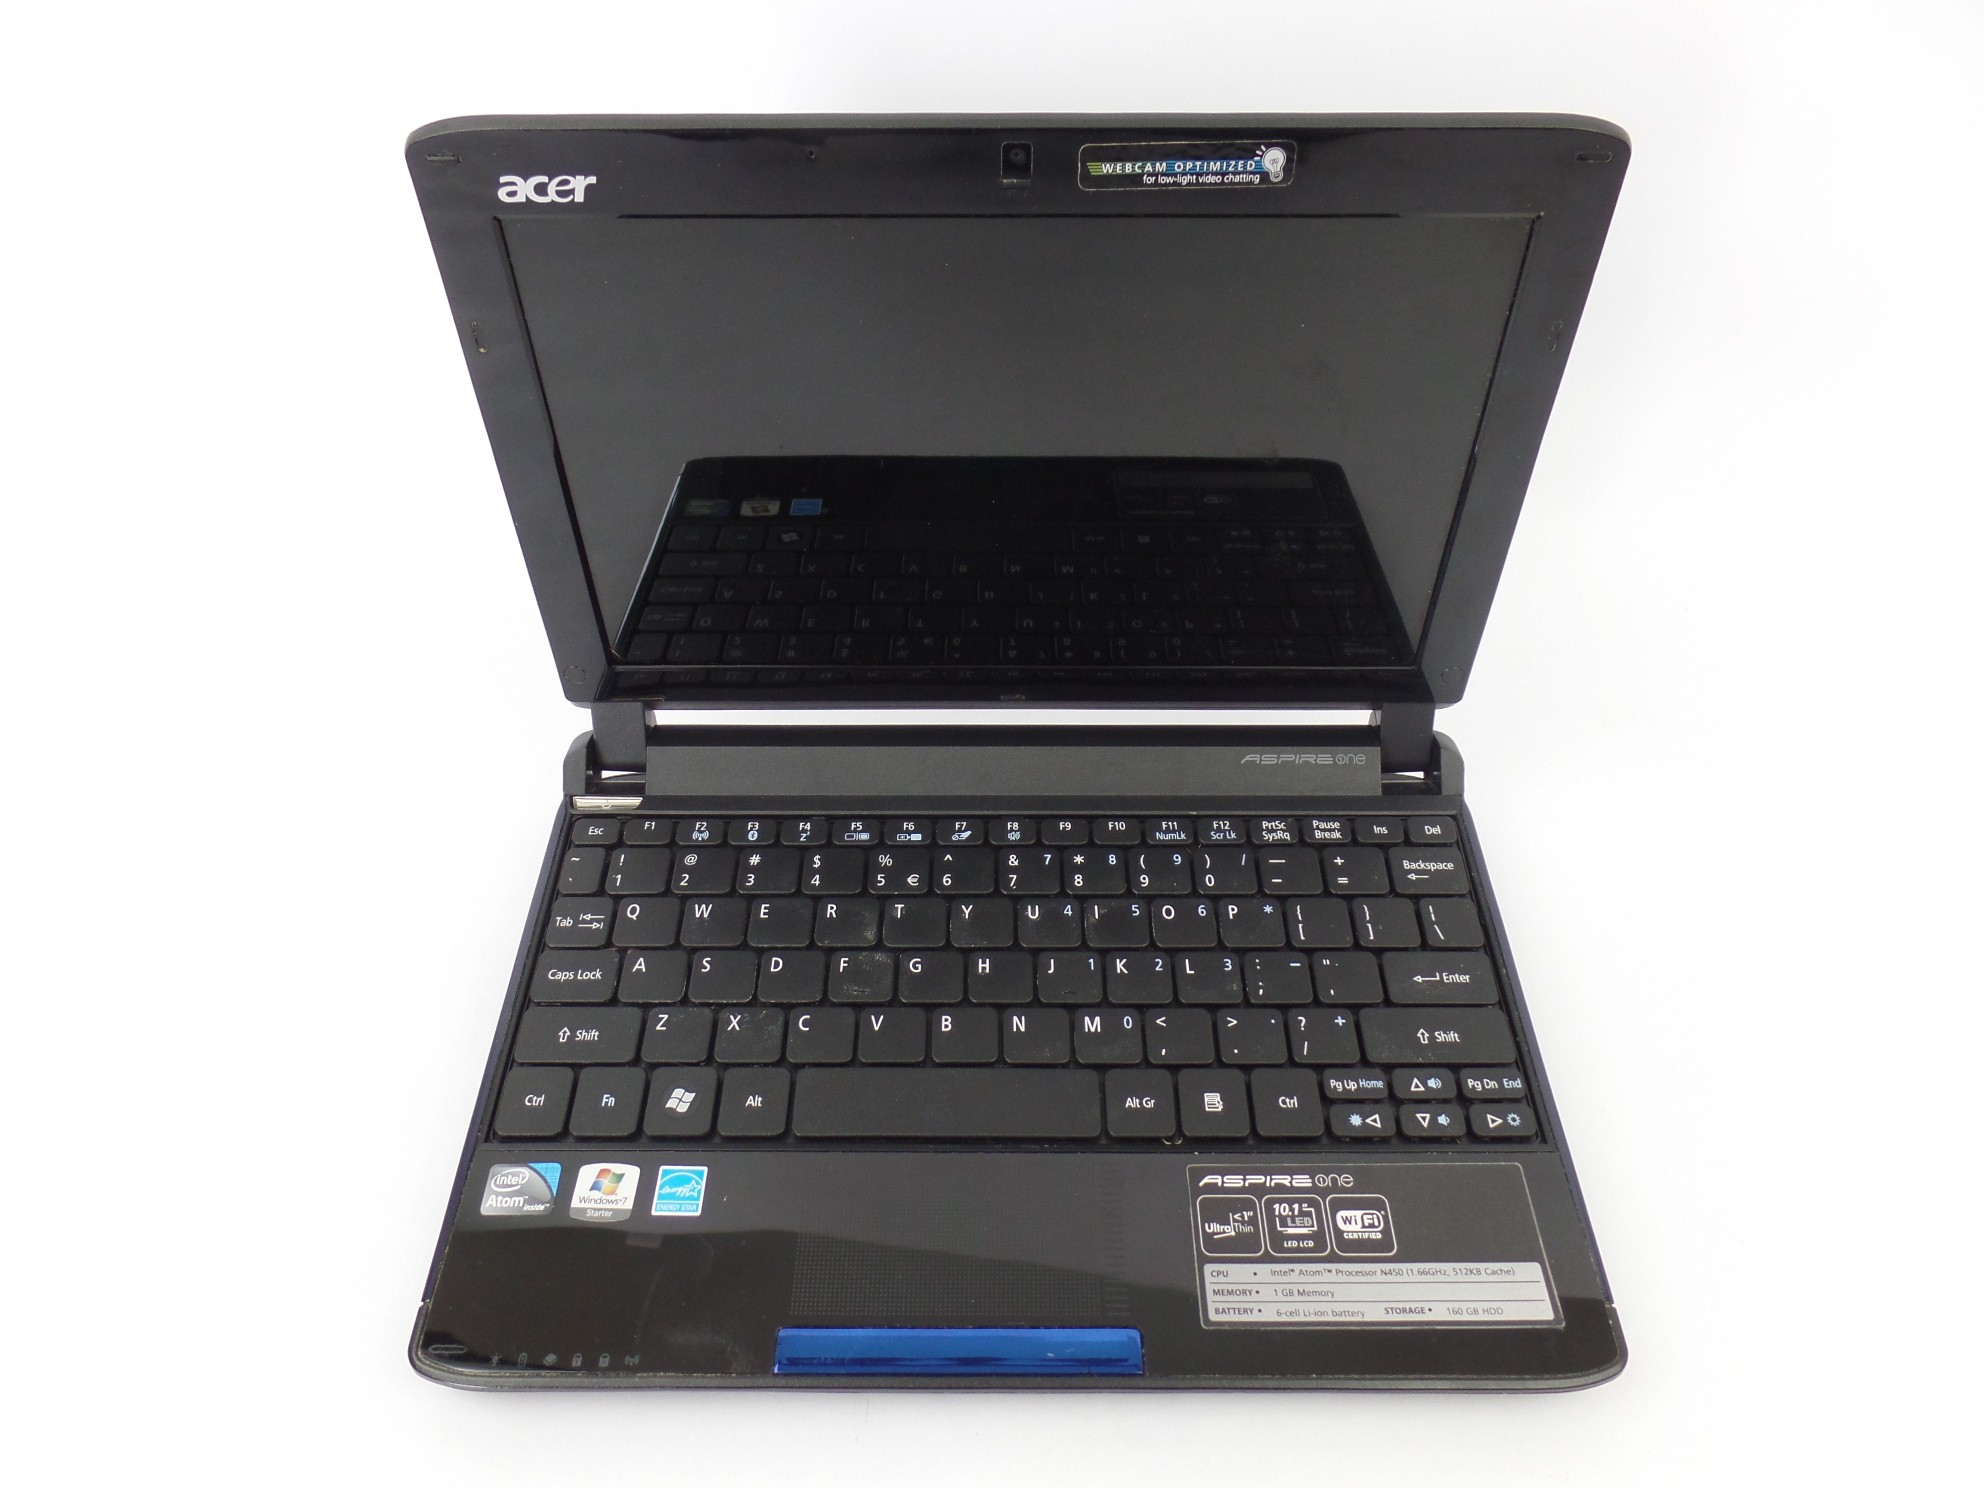 Acer Aspire One 532h-2588 10.1" Atom N450 1GB RAM No HDD Boots to BIOS